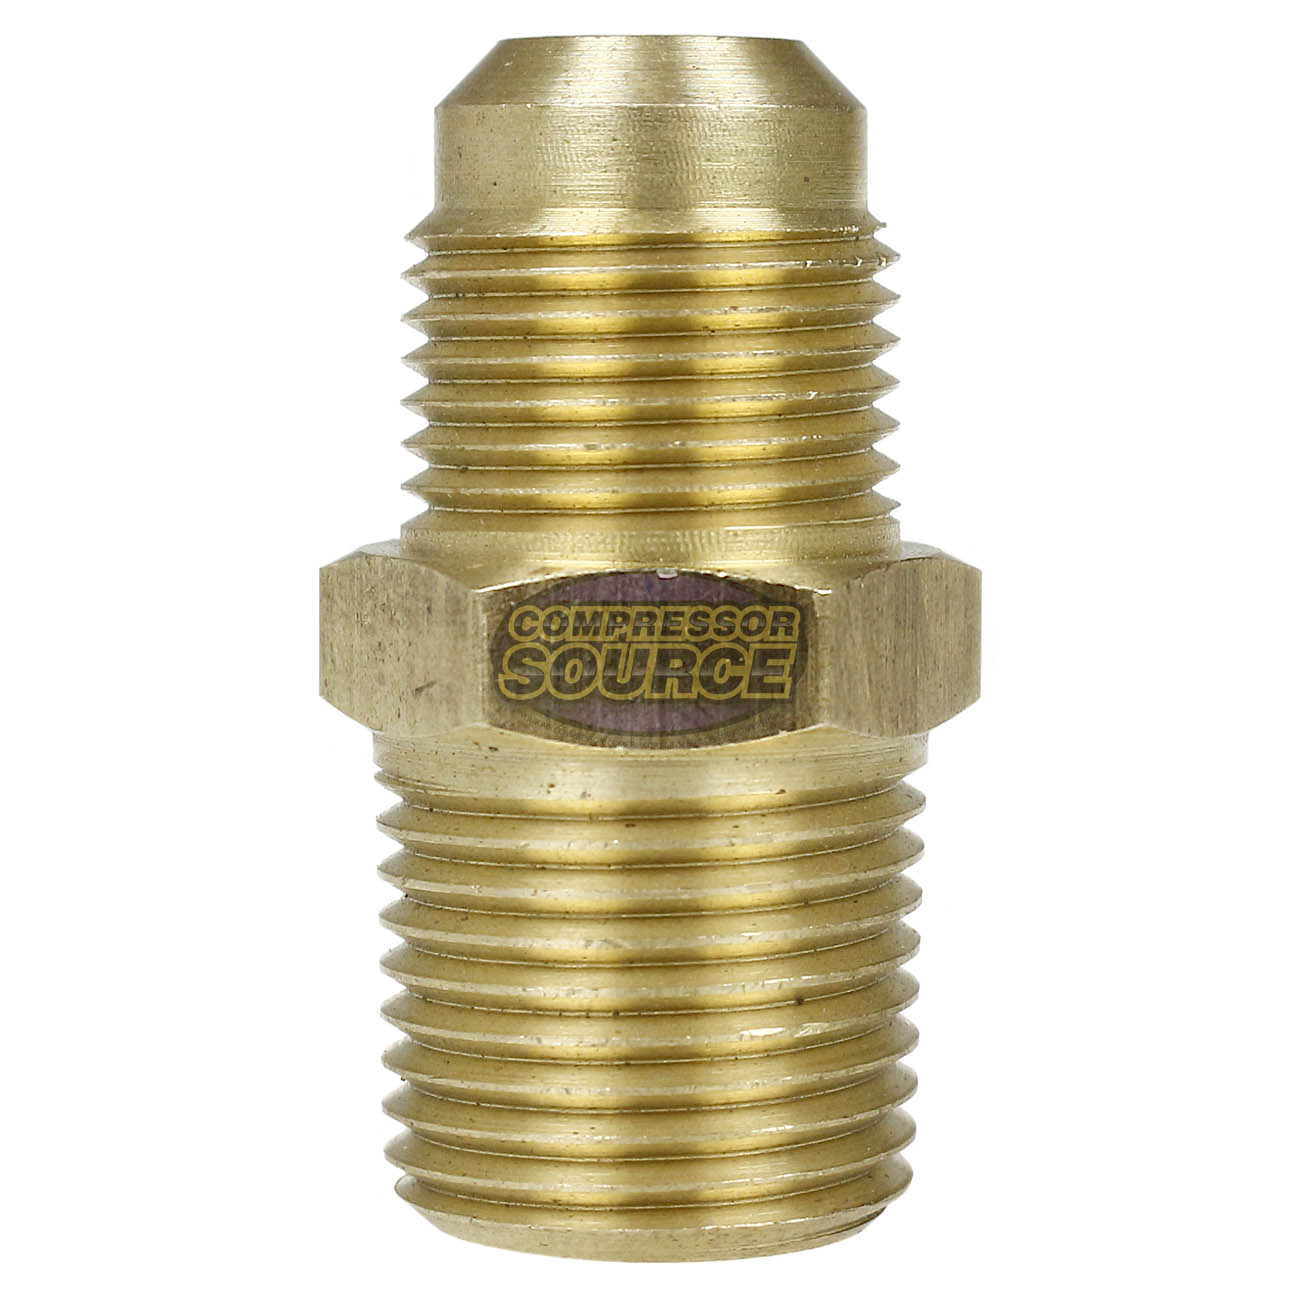 1/2" x 1/2" Brass Male Adapter Straight Connector for Flared Tubing 10269-2Pack